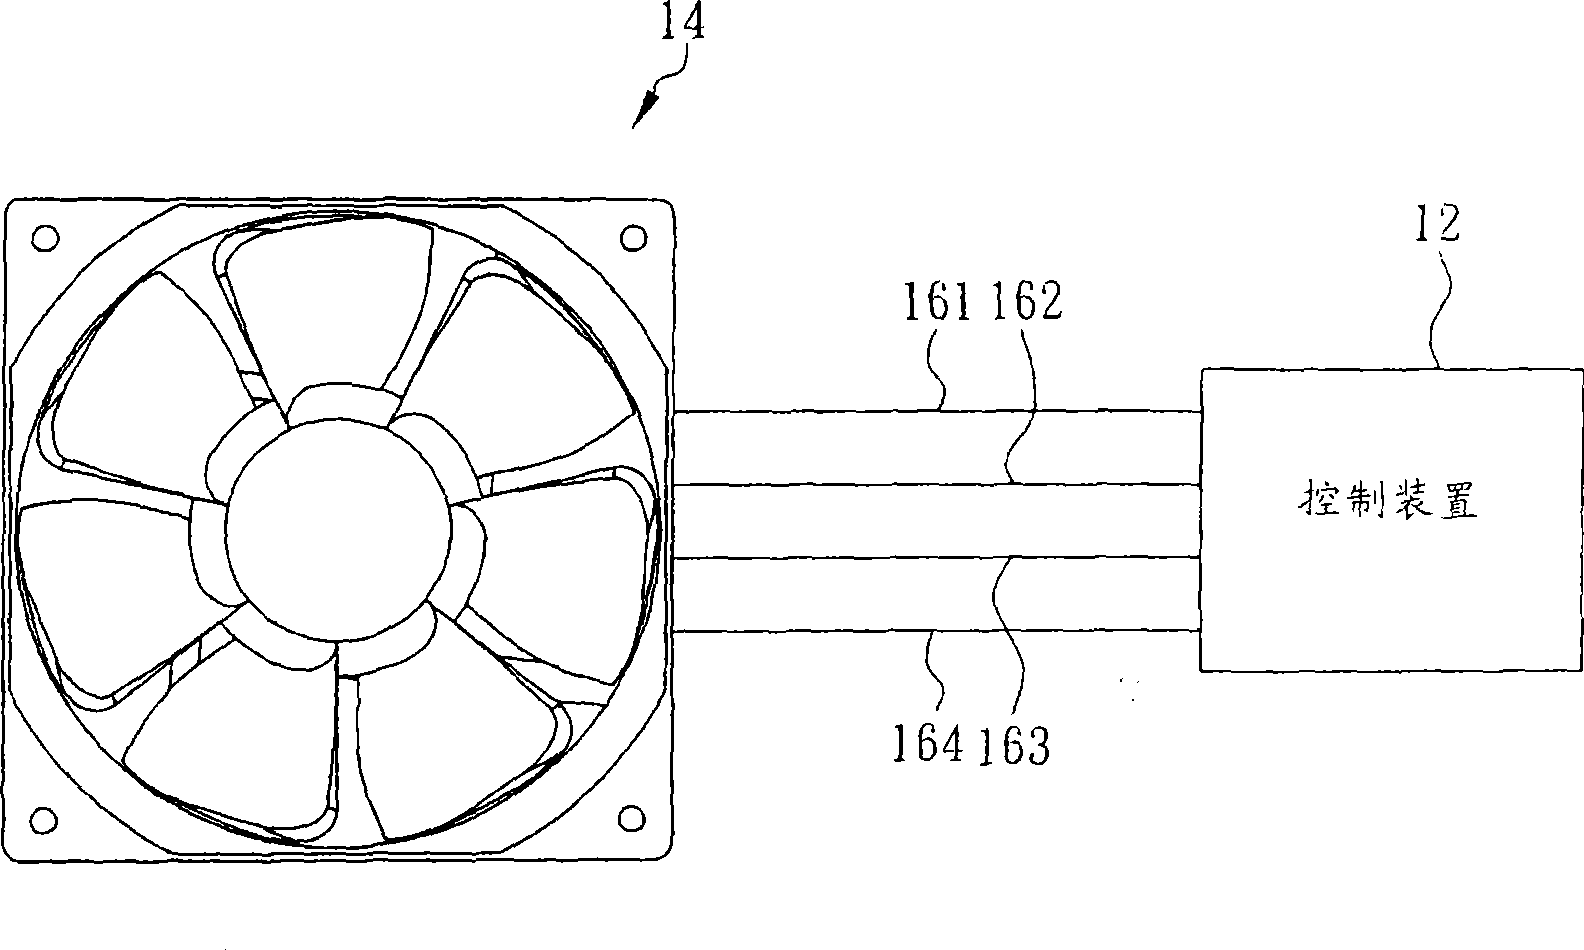 Motor device and motor control speed system